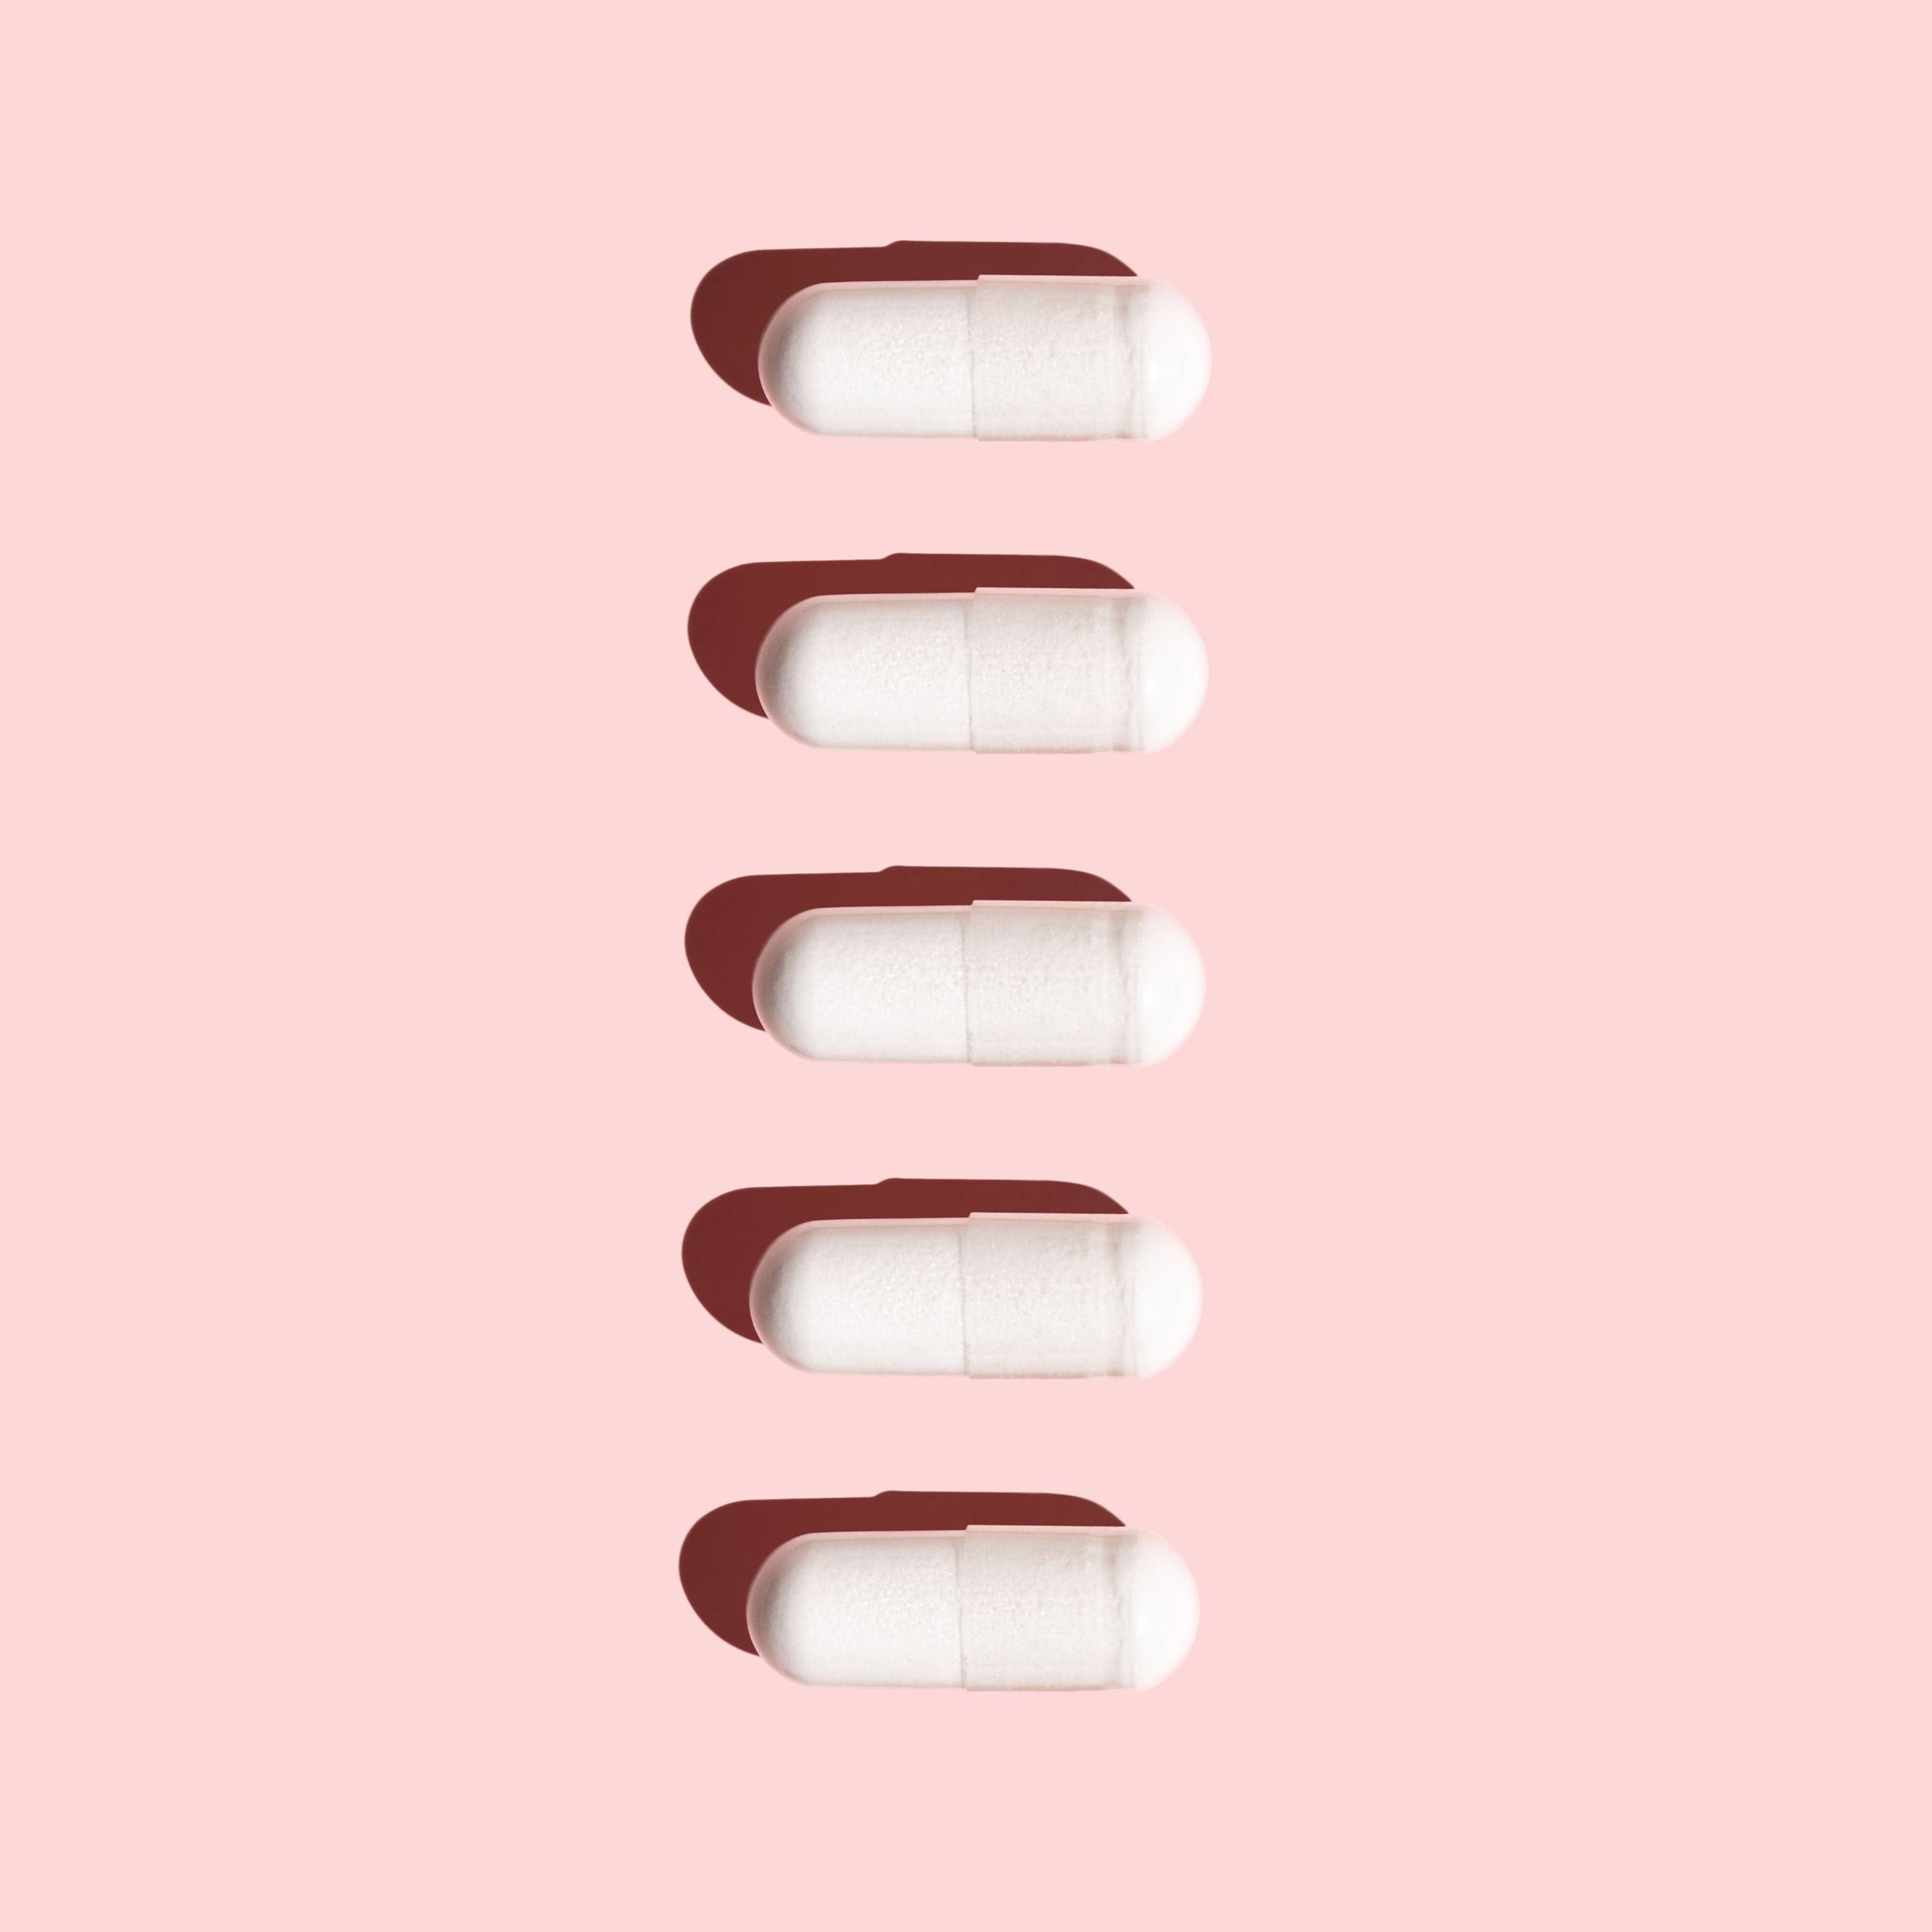 D-Mannose capsules to prevent UTI on a pink background